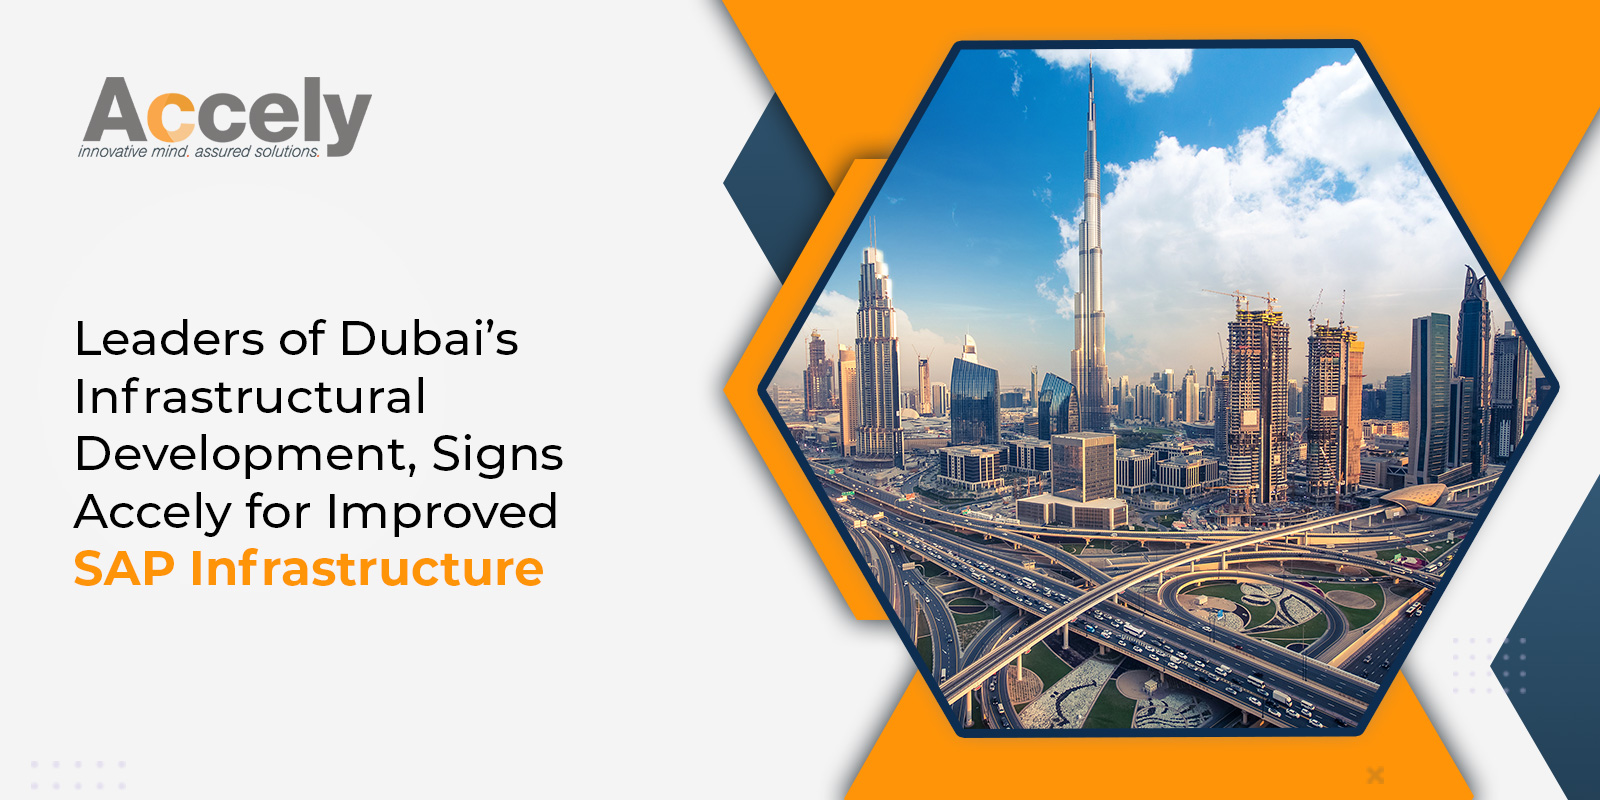 Leaders of Dubai’s Infrastructural Development, Signs Accely for improved SAP Infrastructure